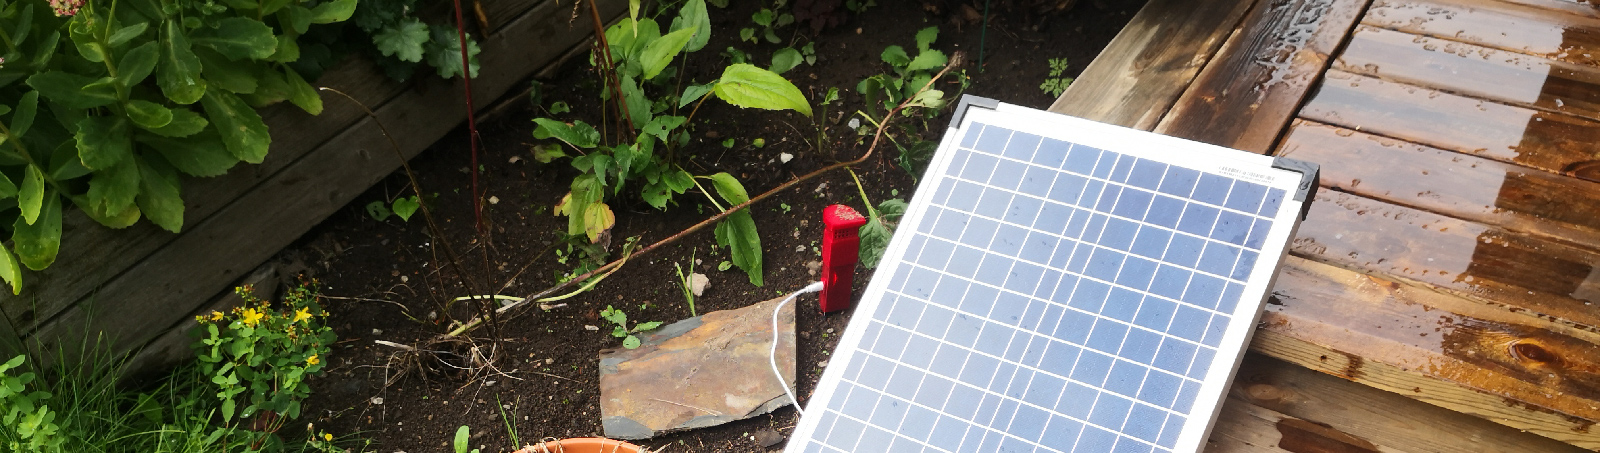 Article image for How much solar will your IoT project require?